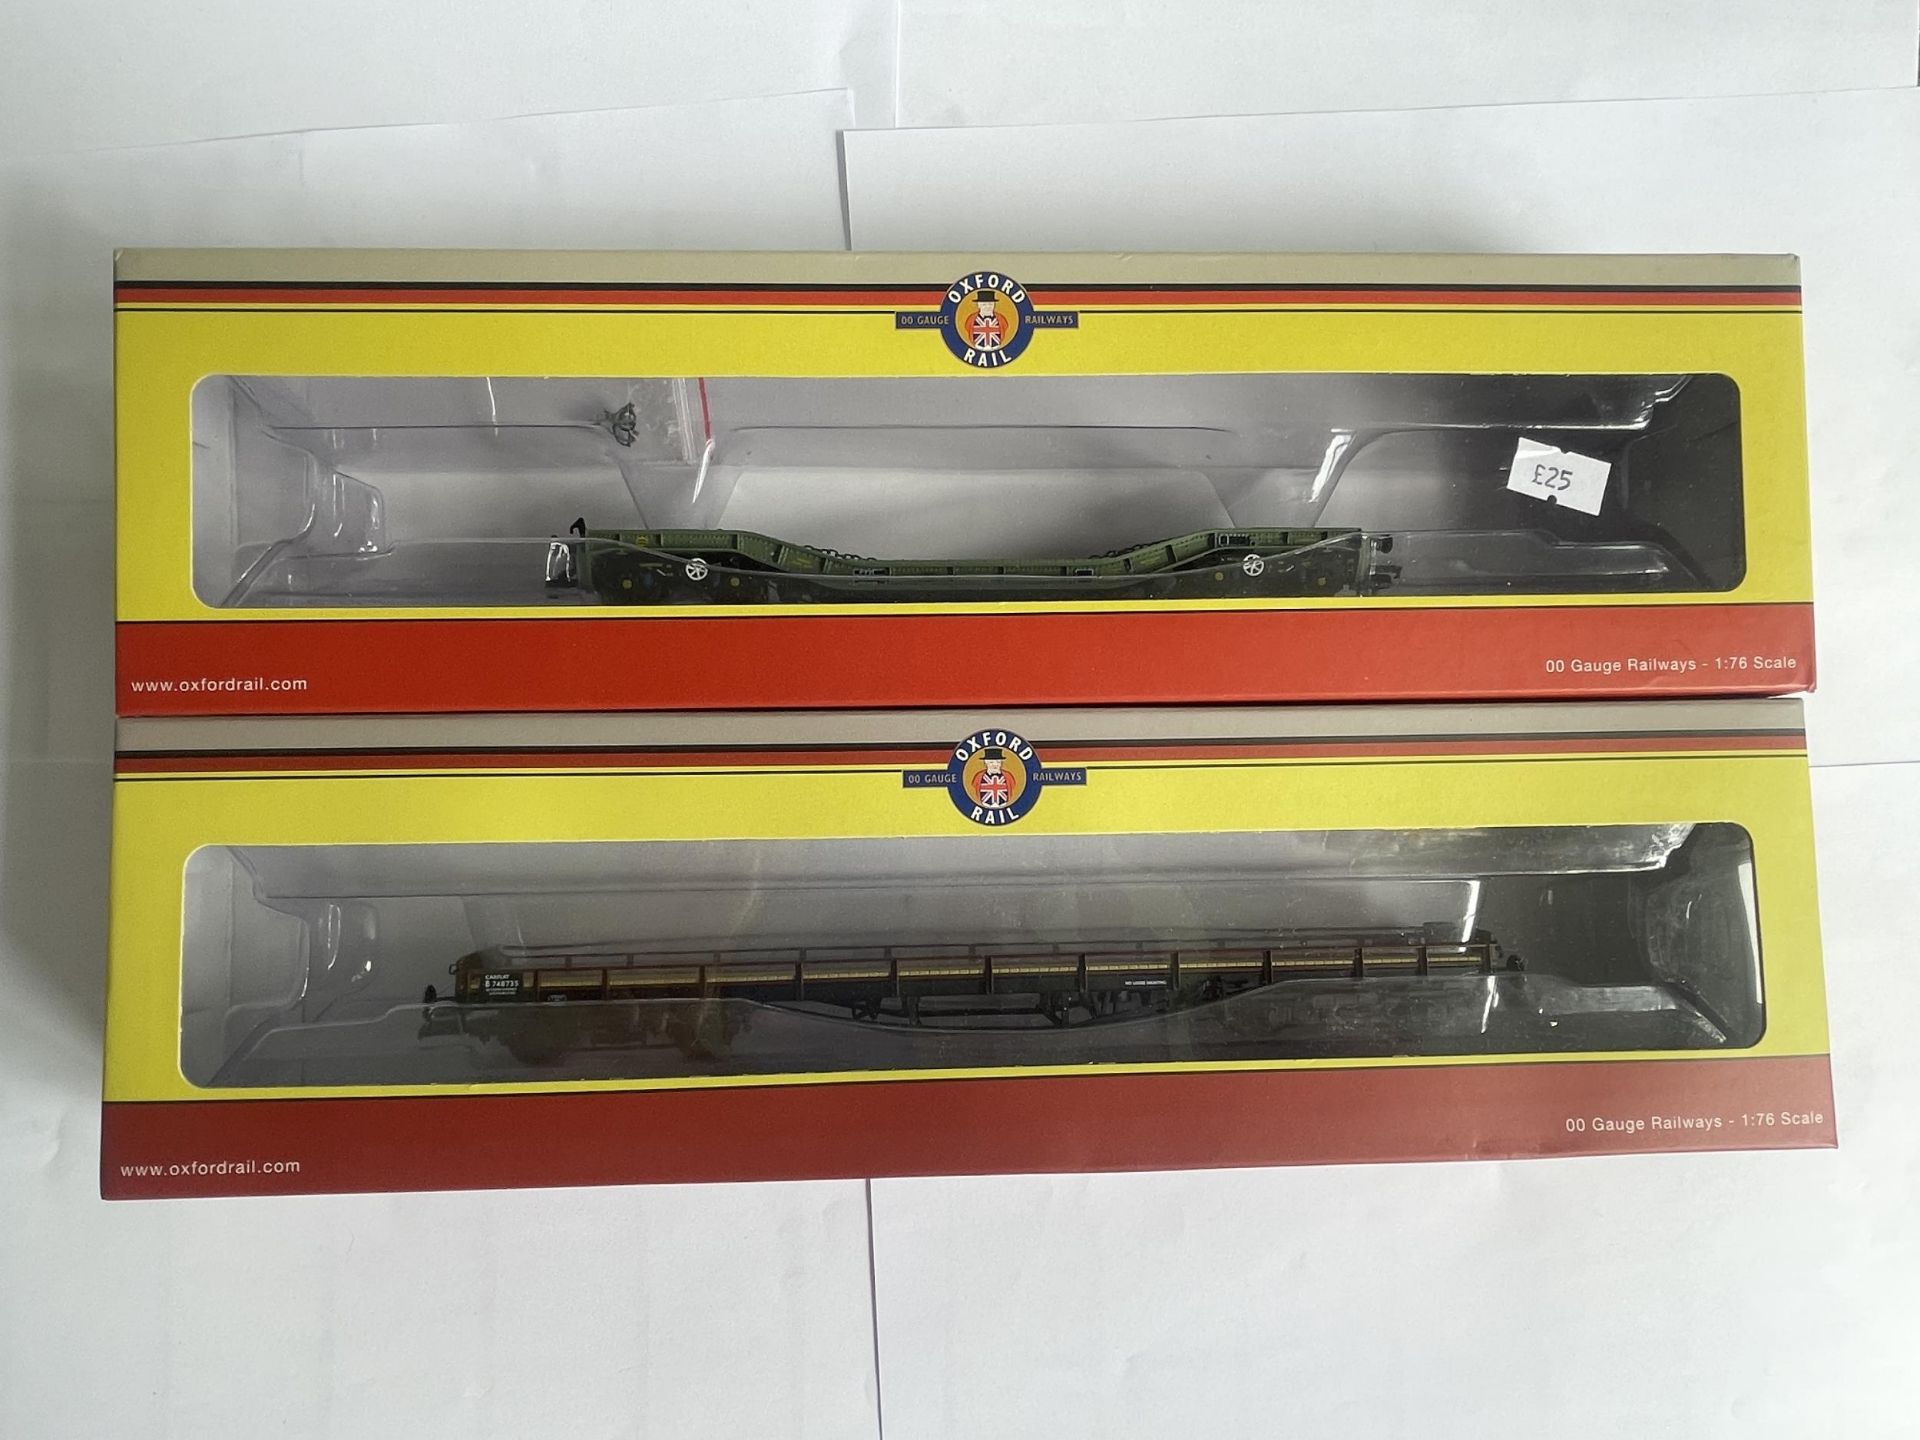 TWO BOXED OXFORD 00 GAUGE FREIGHT FLATBED CARRIAGES